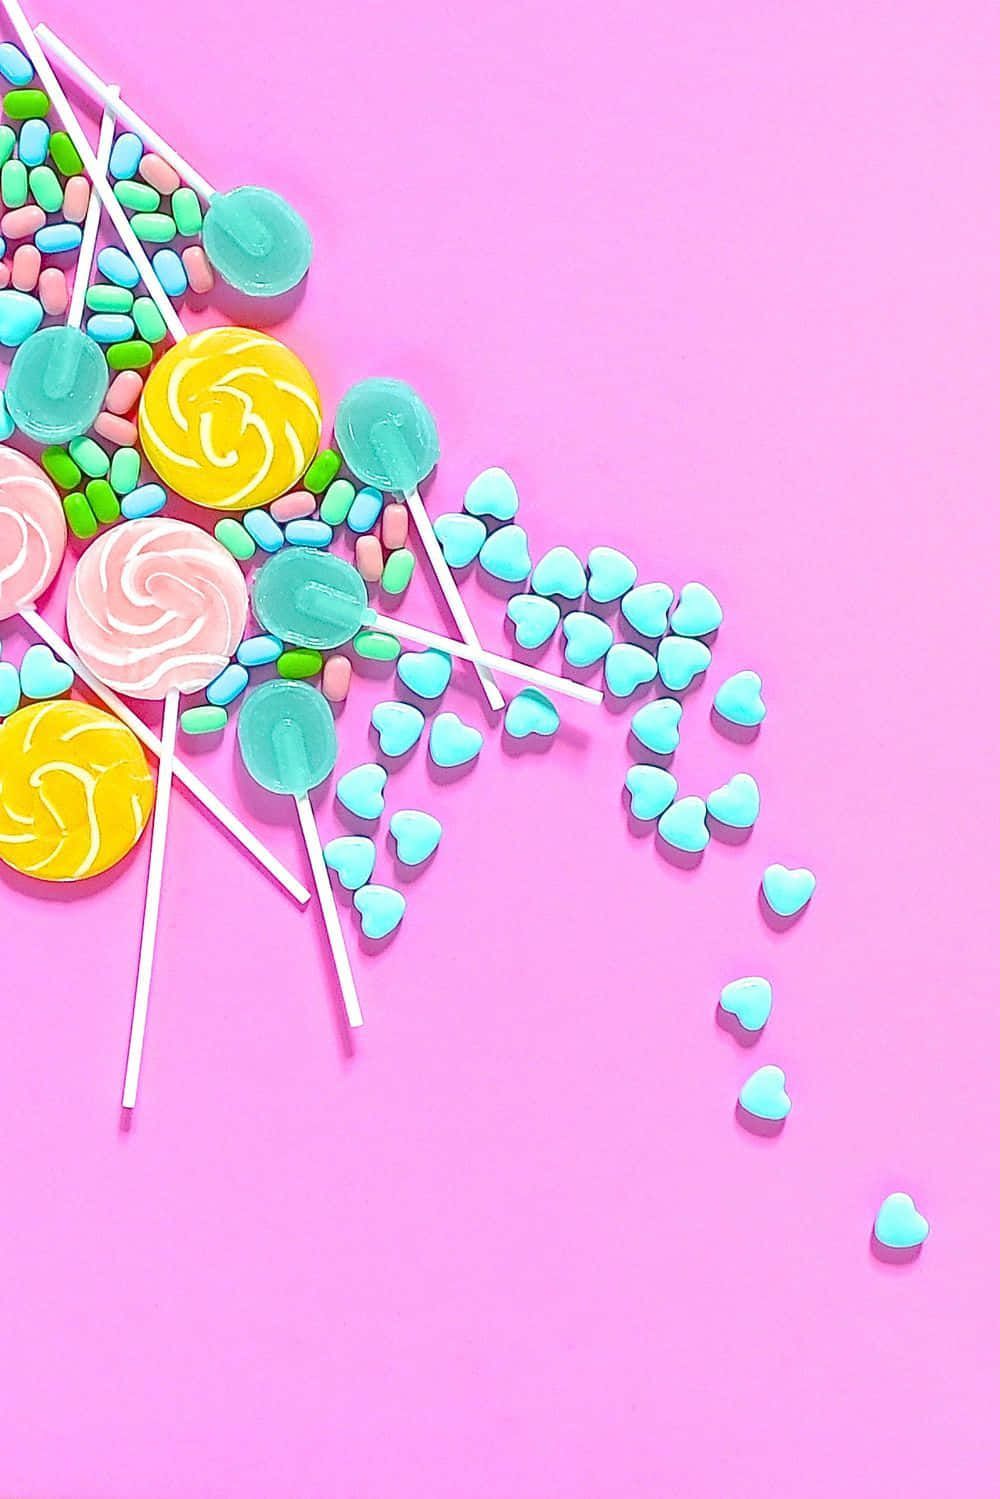 Download Candy Aesthetic Wallpaper